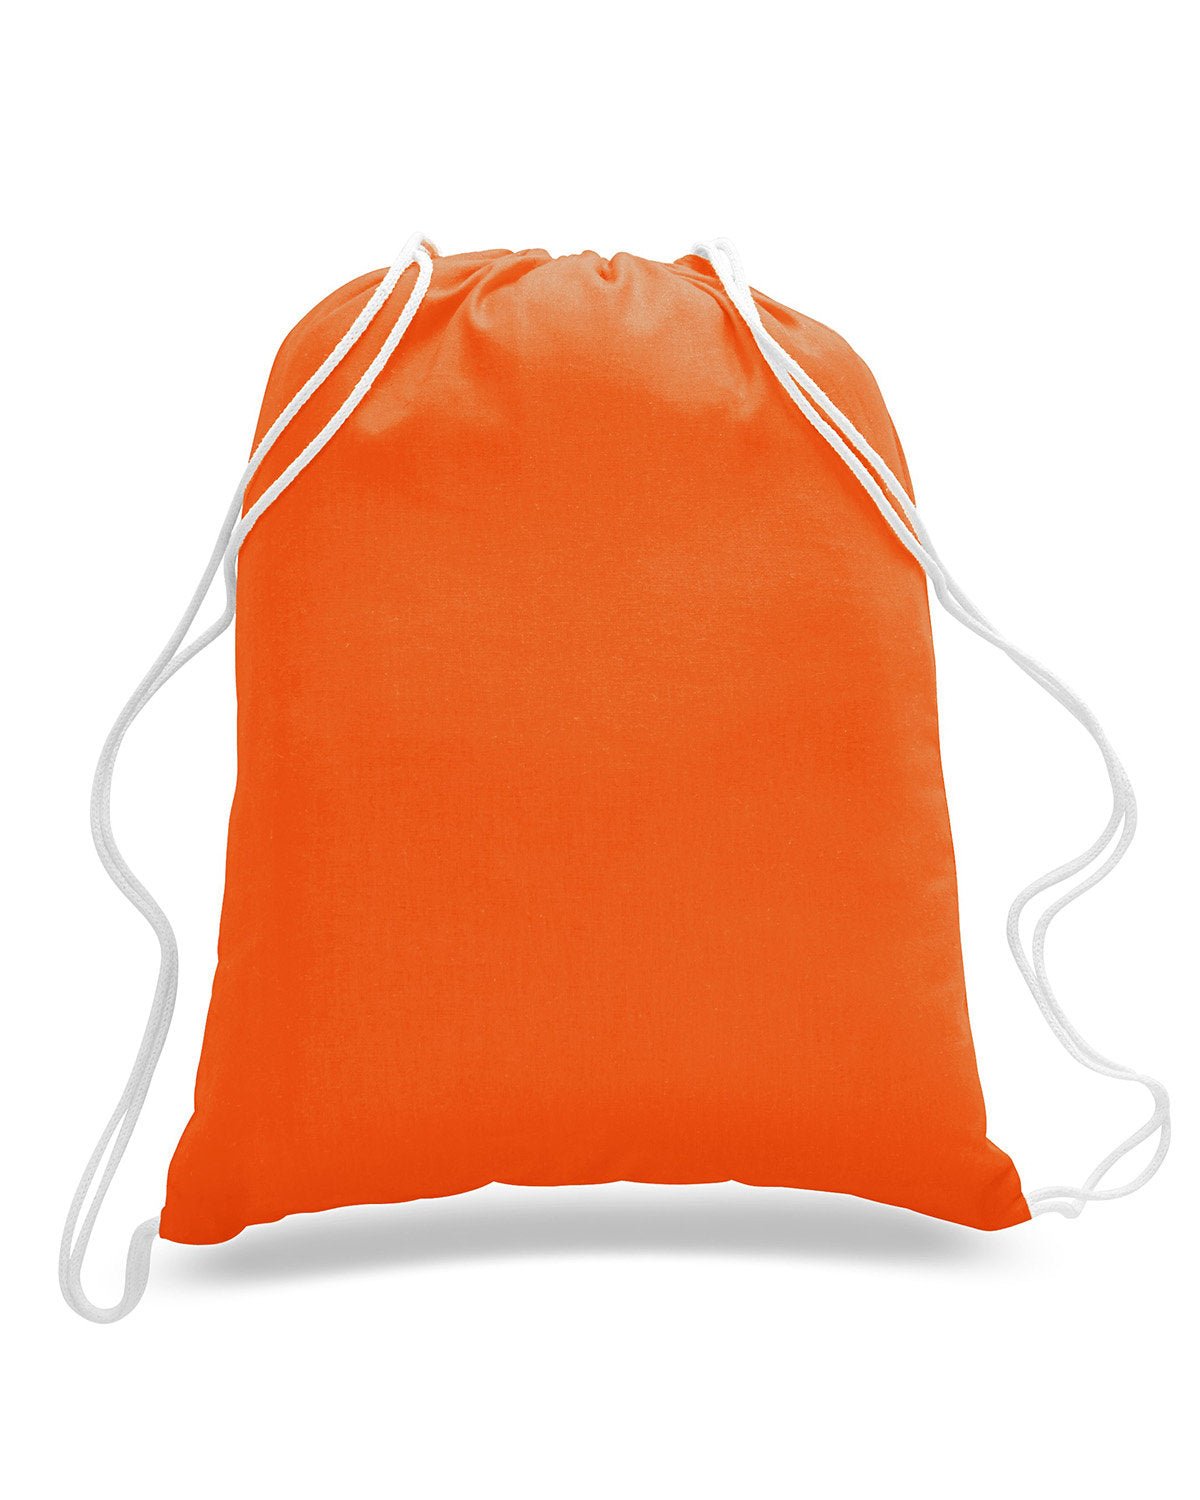 OAD101-OAD-ORANGE-OAD-Bags and Accessories-1